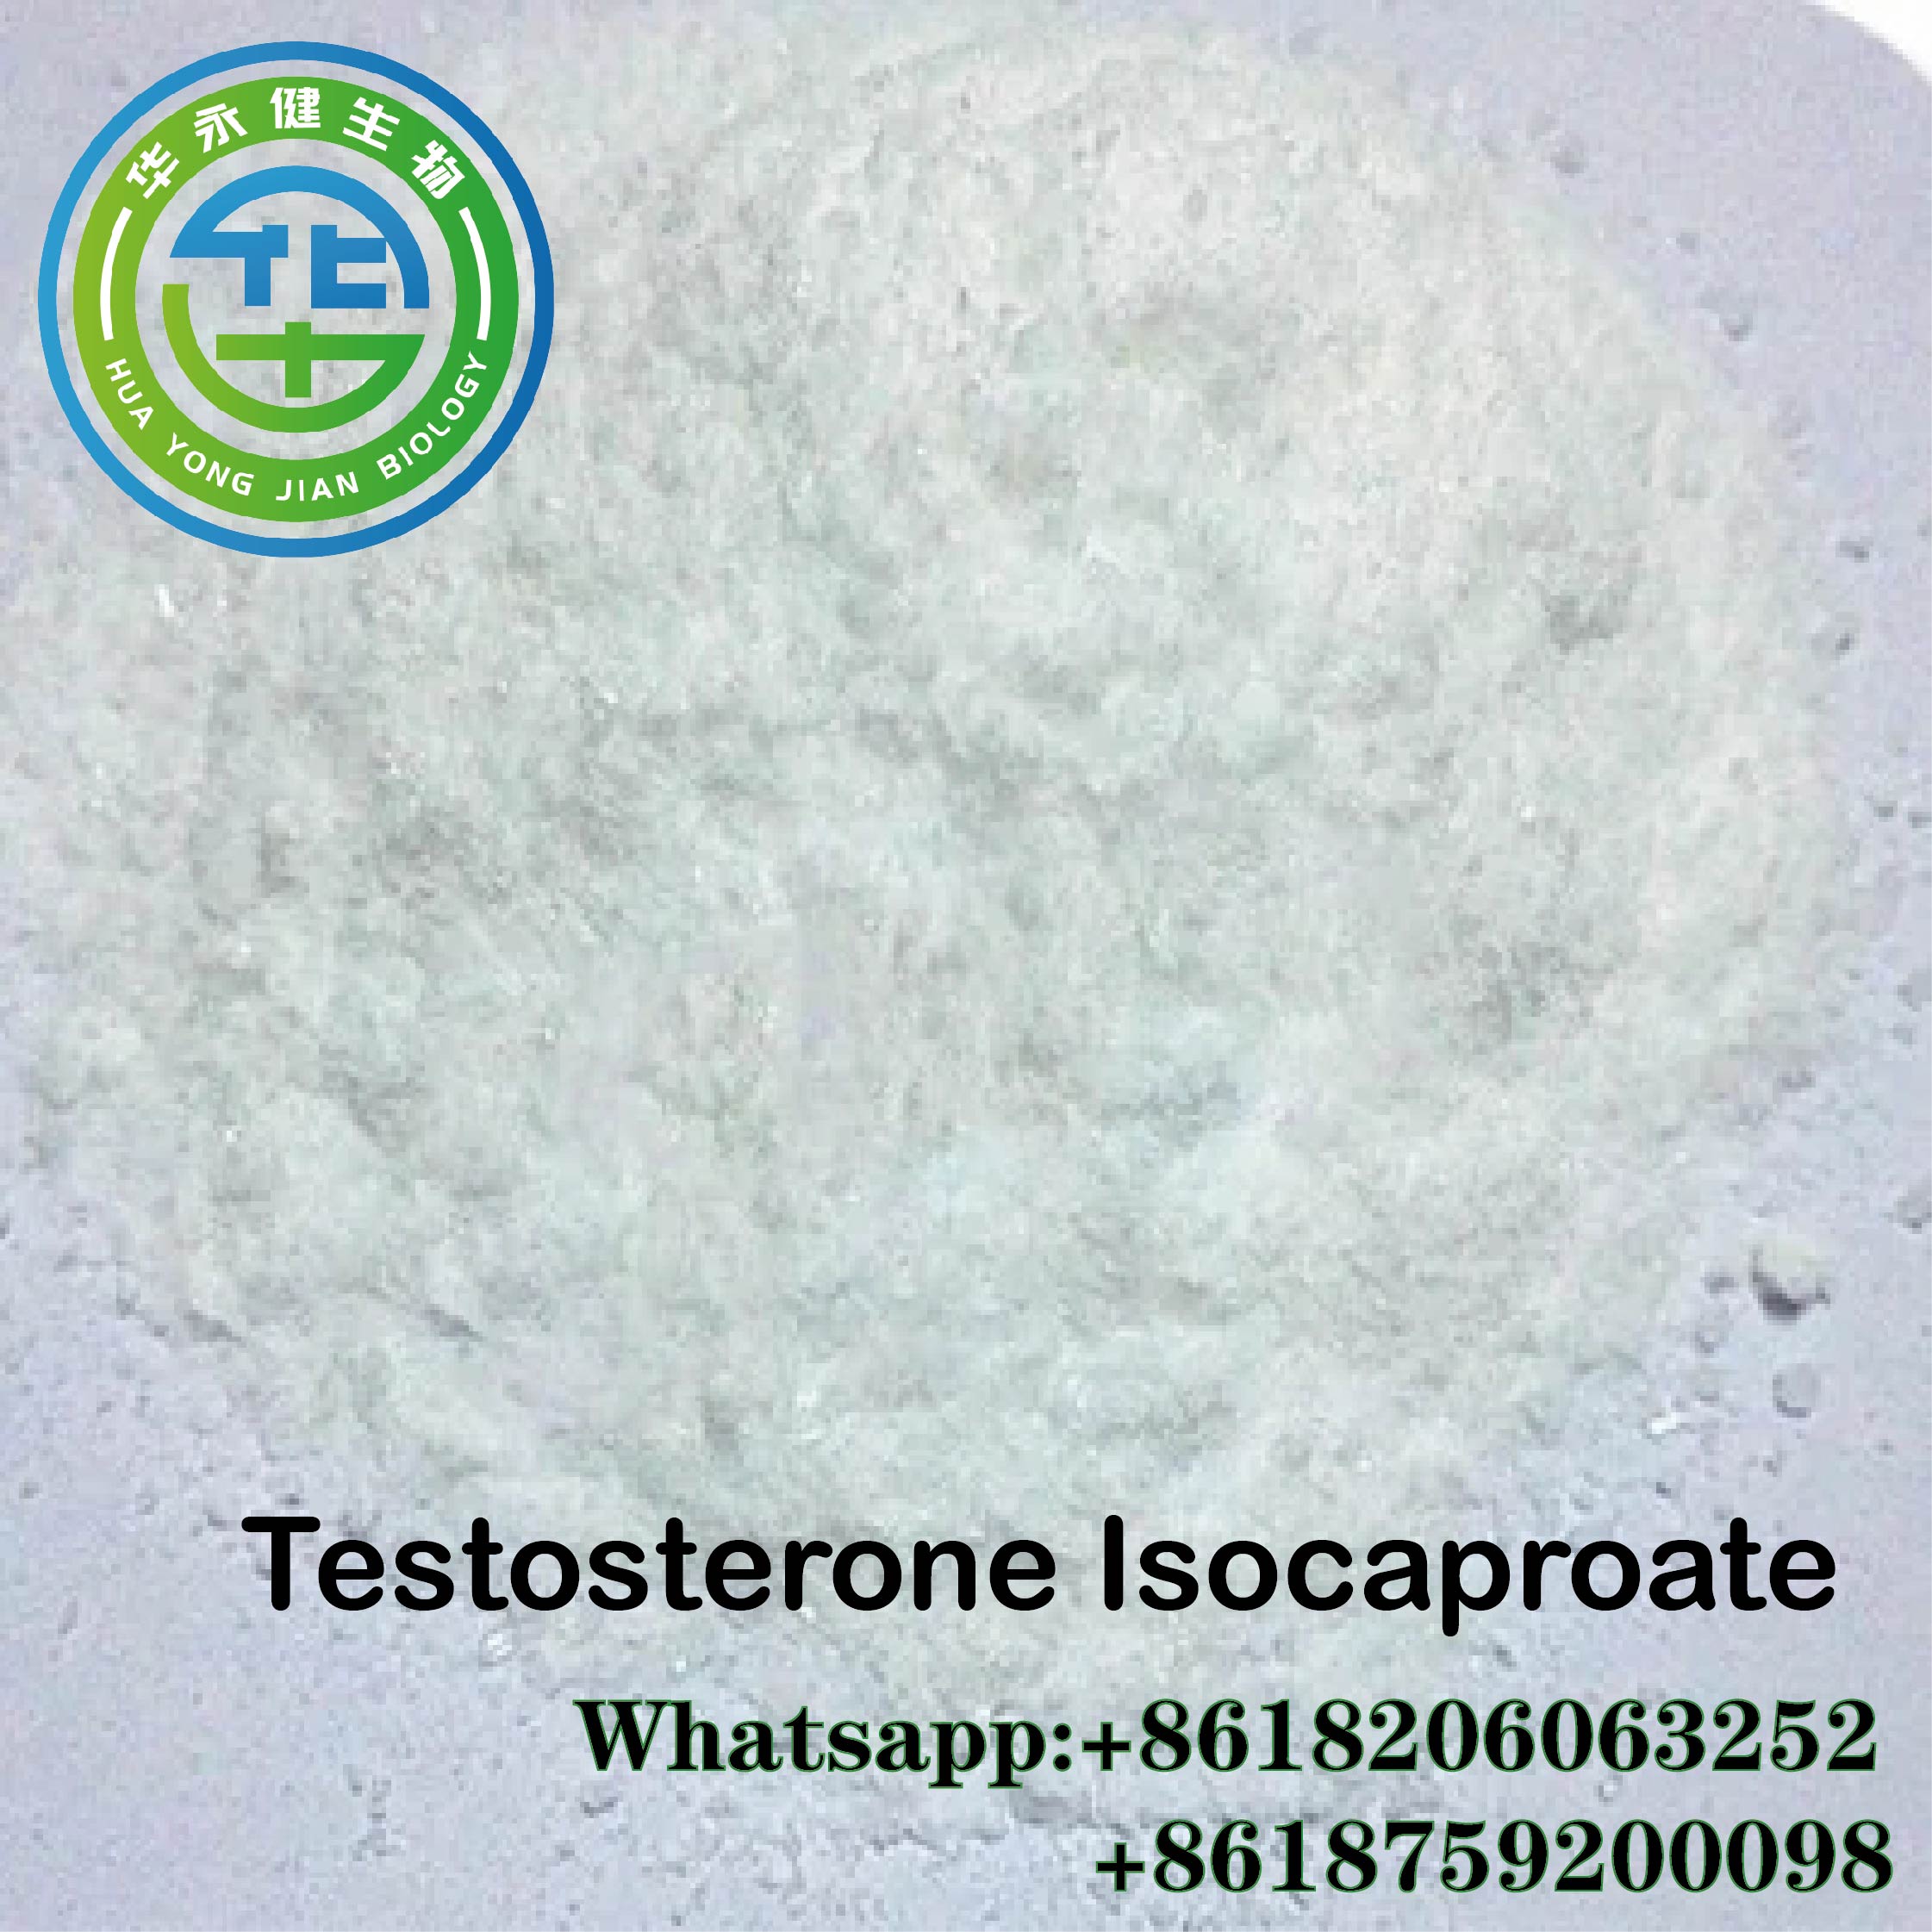 99% Testosterone Isocaproate/Test I Safe Steroids For Muscle Building CasNO.15262-86-9